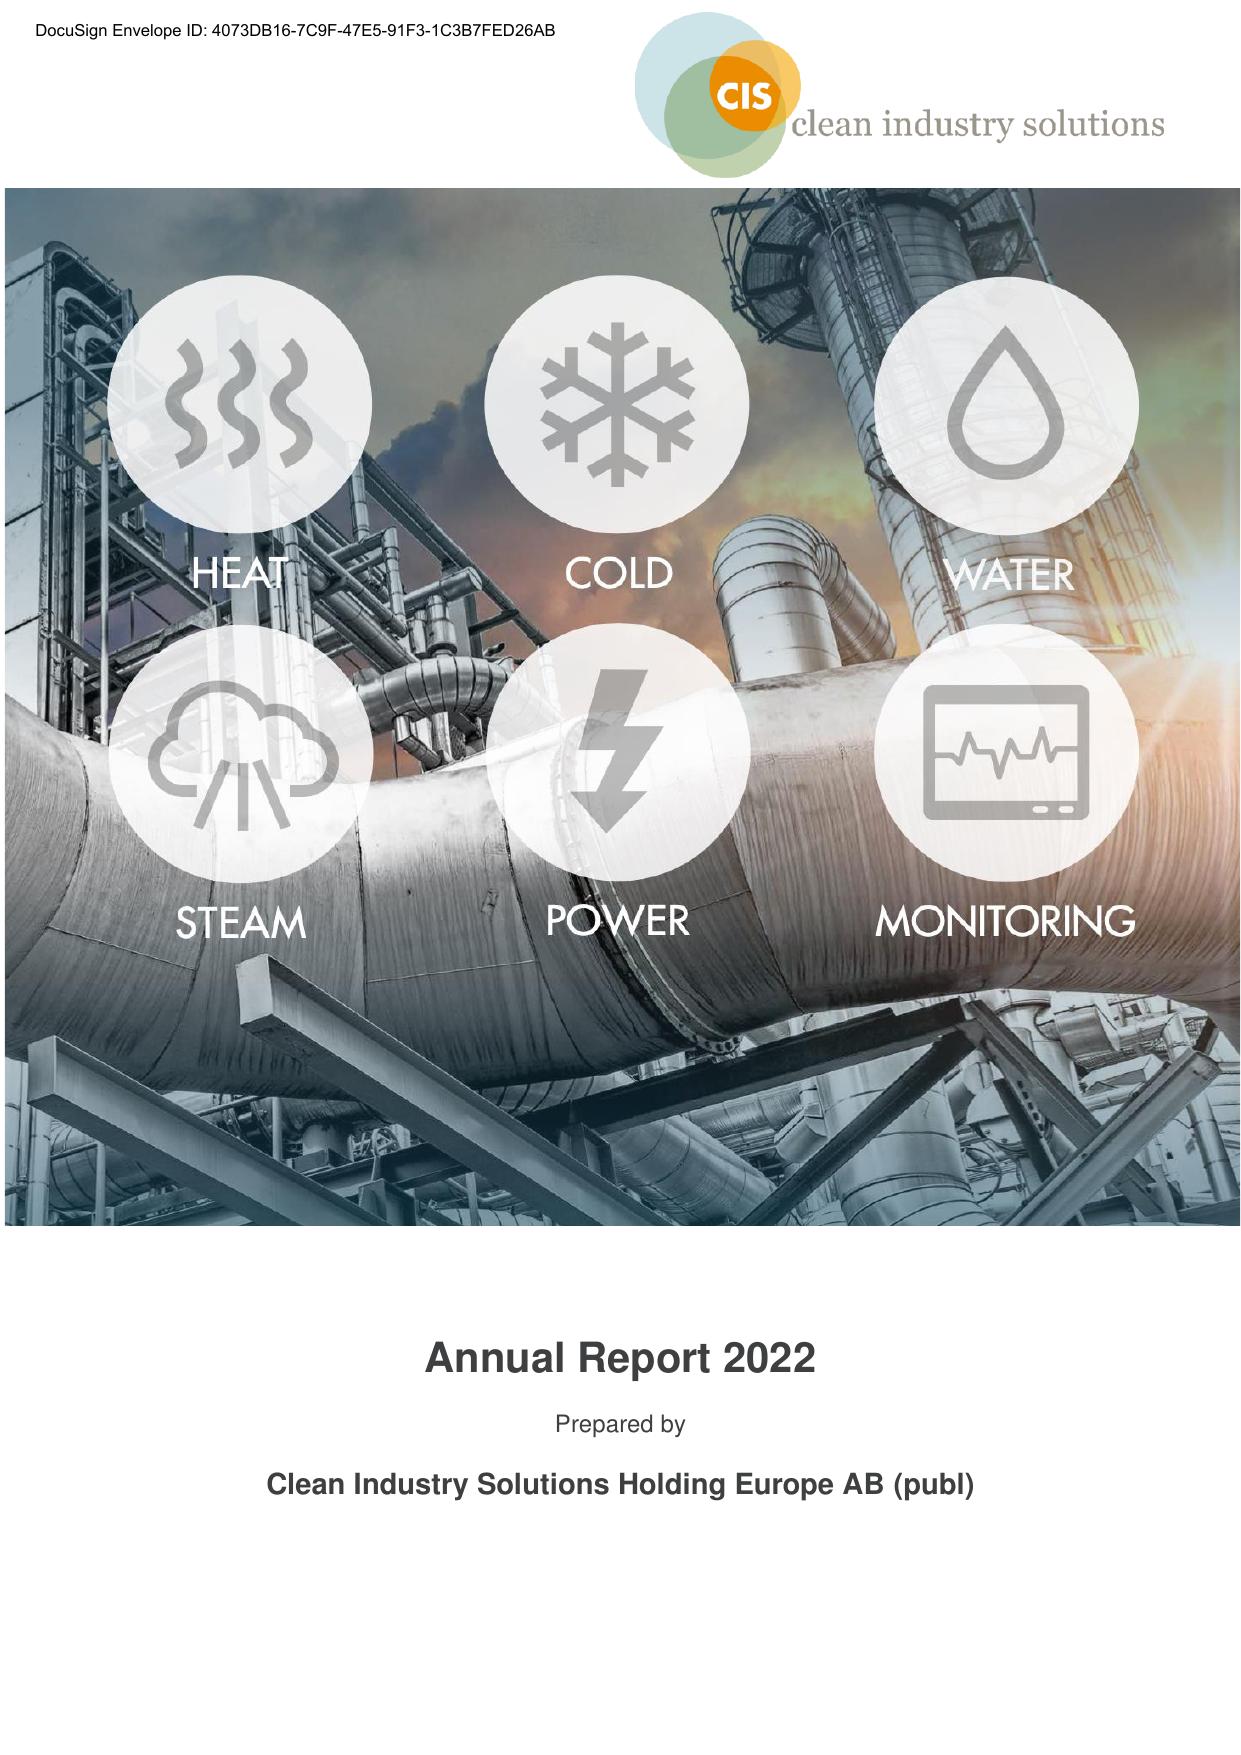 CLEANINDUSTRYSOLUTIONS 2023 Annual Report